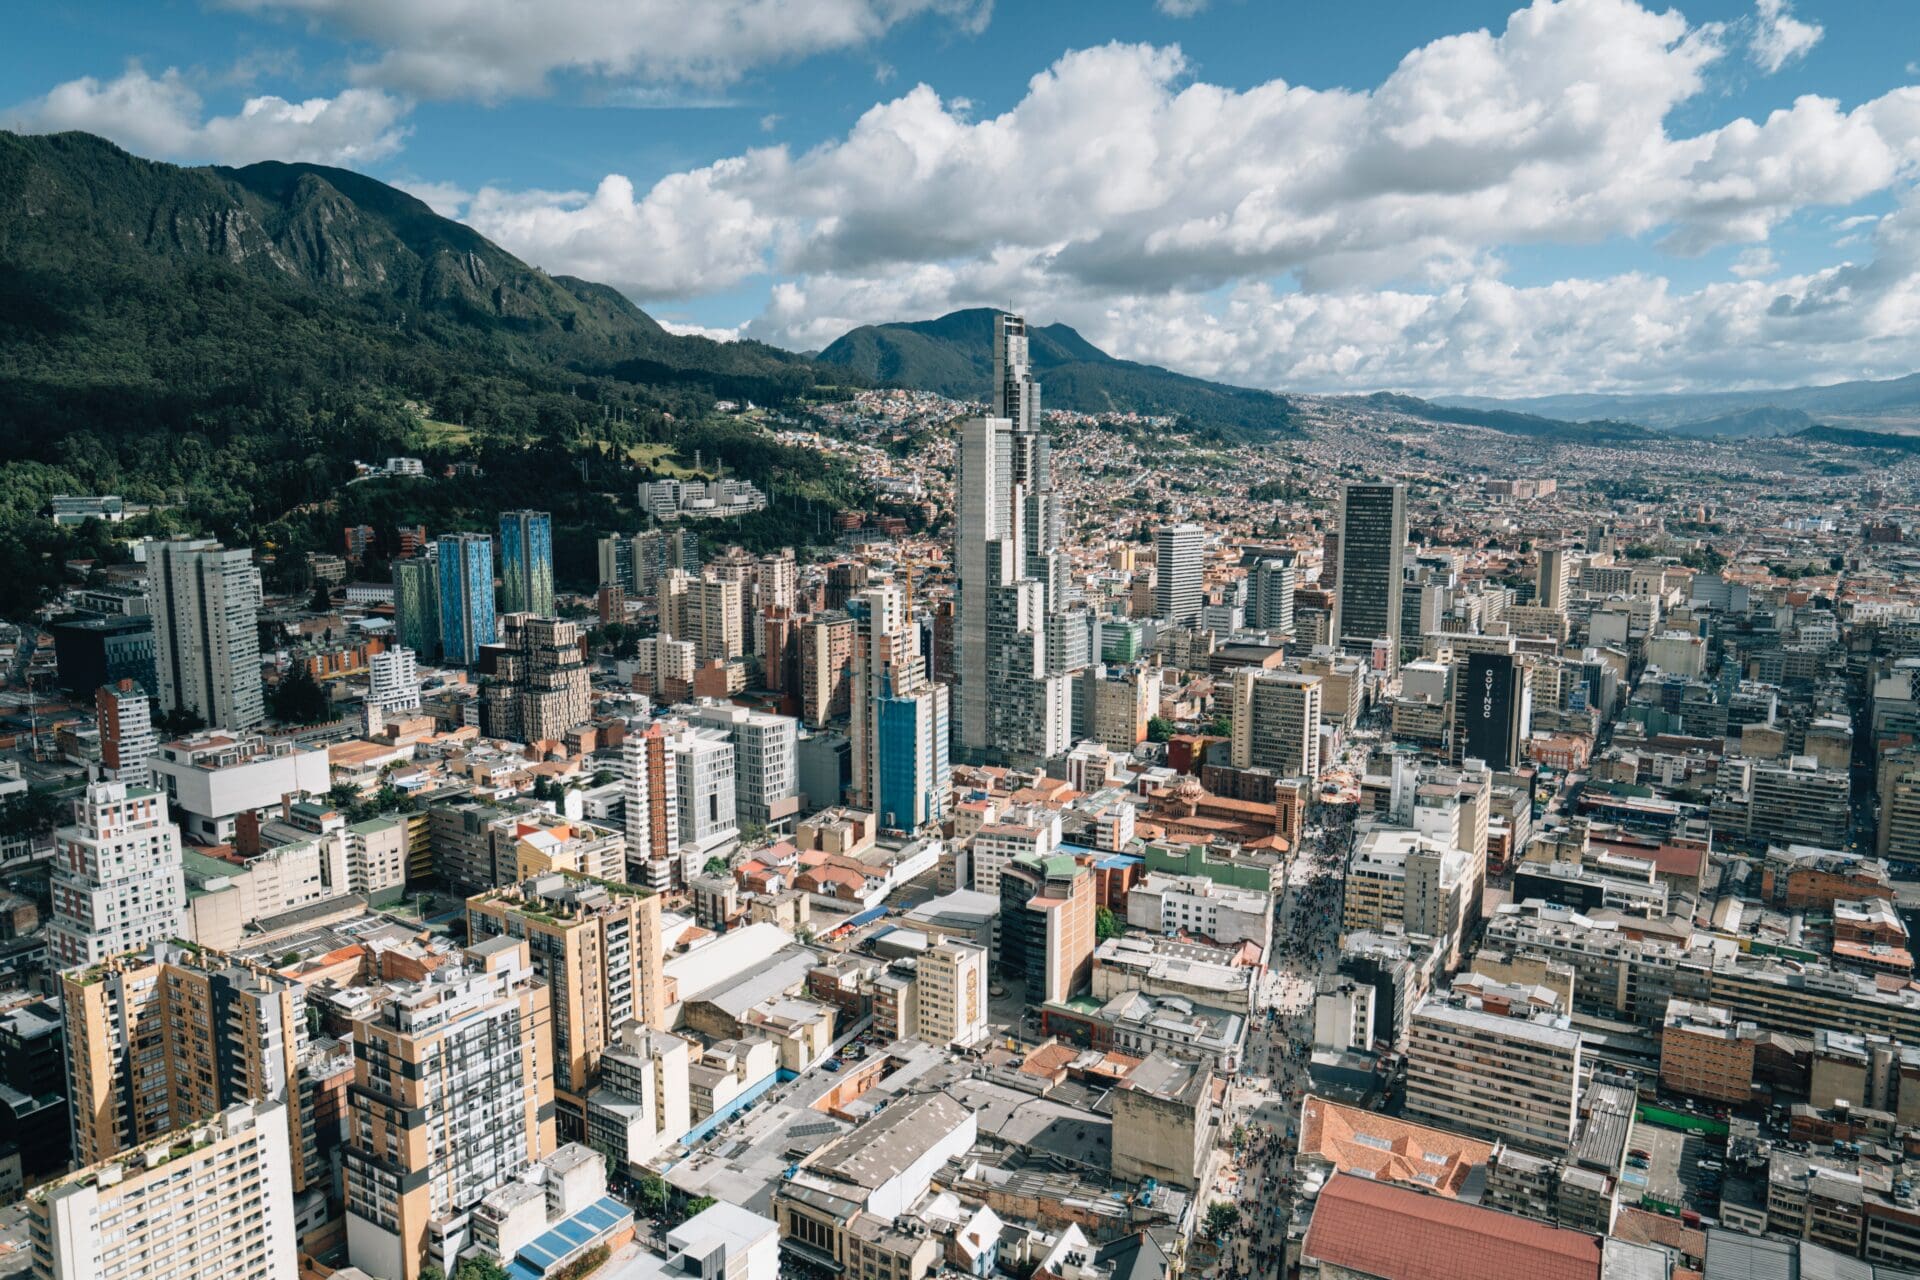 What are countries doing for digital nomads? A view of Bogotá, Colombia